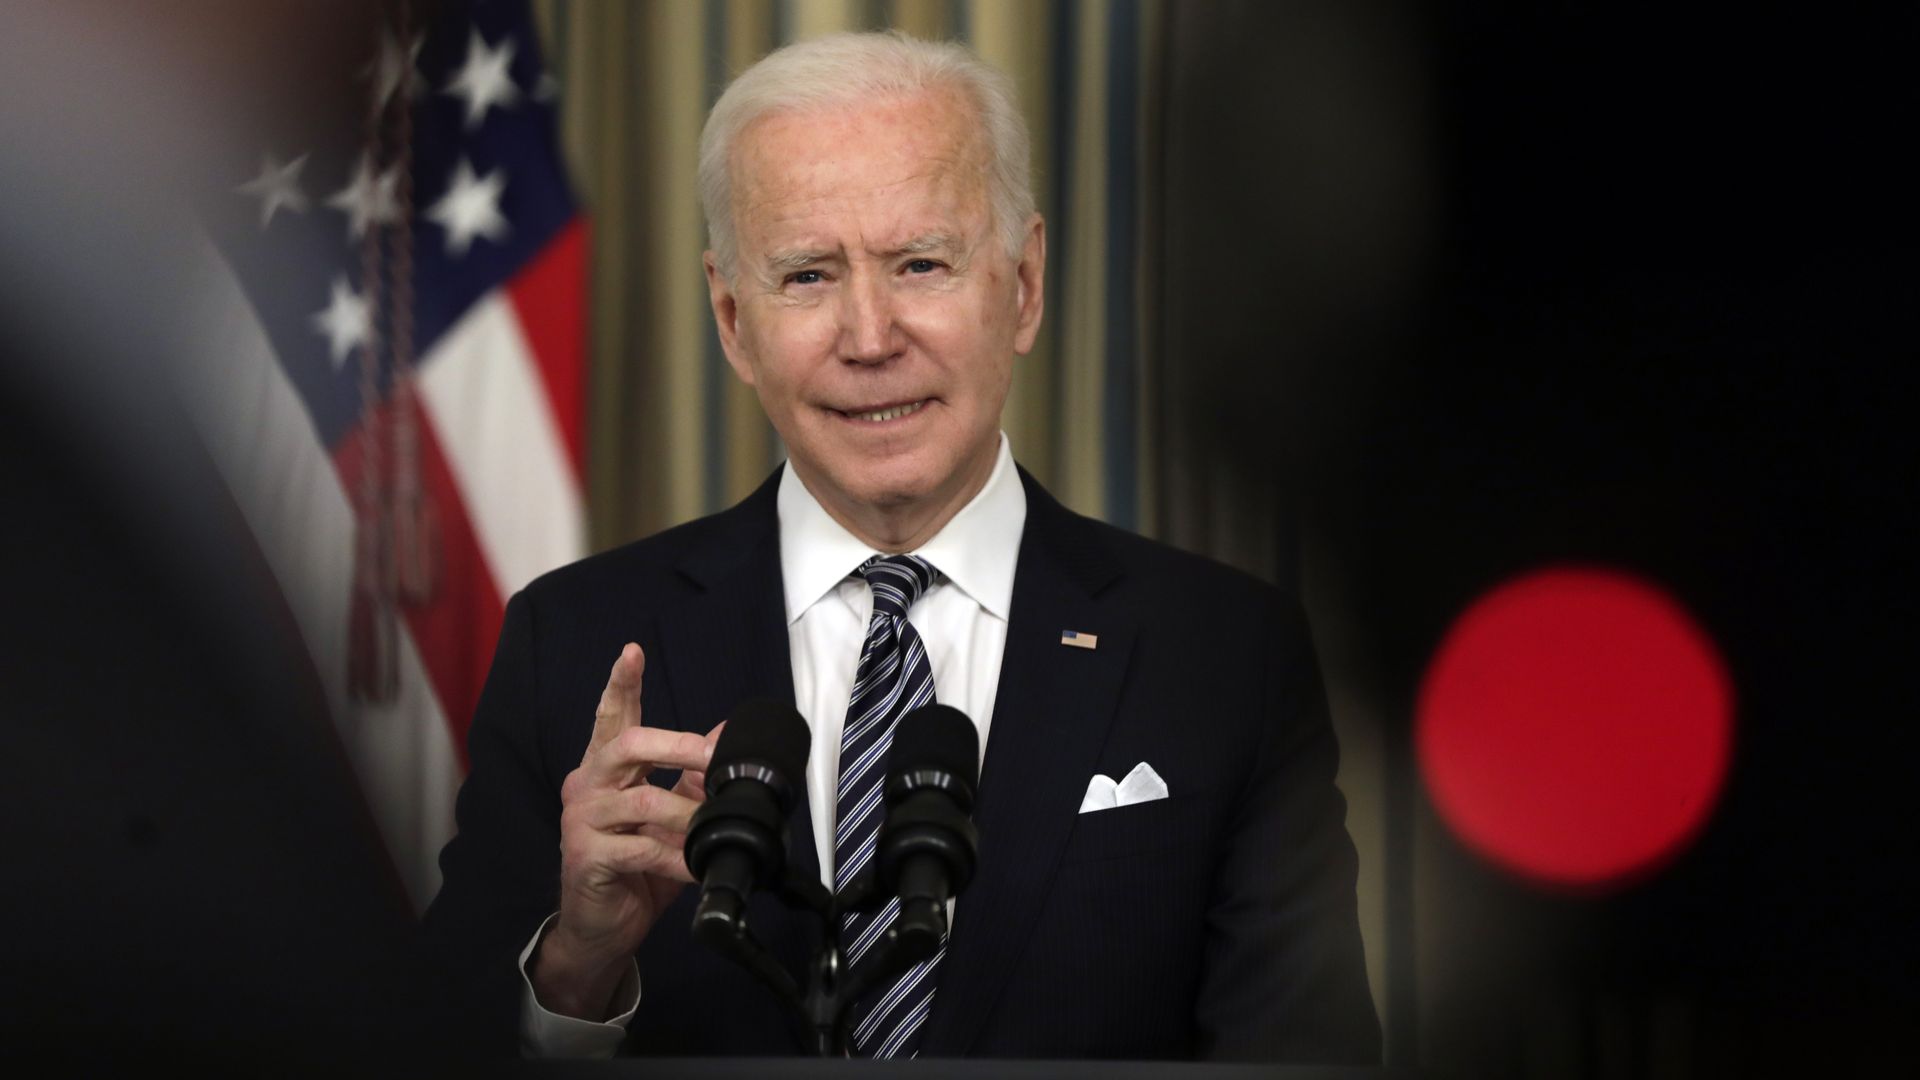 President Biden is seen addressing reporters in the White House on Monday.